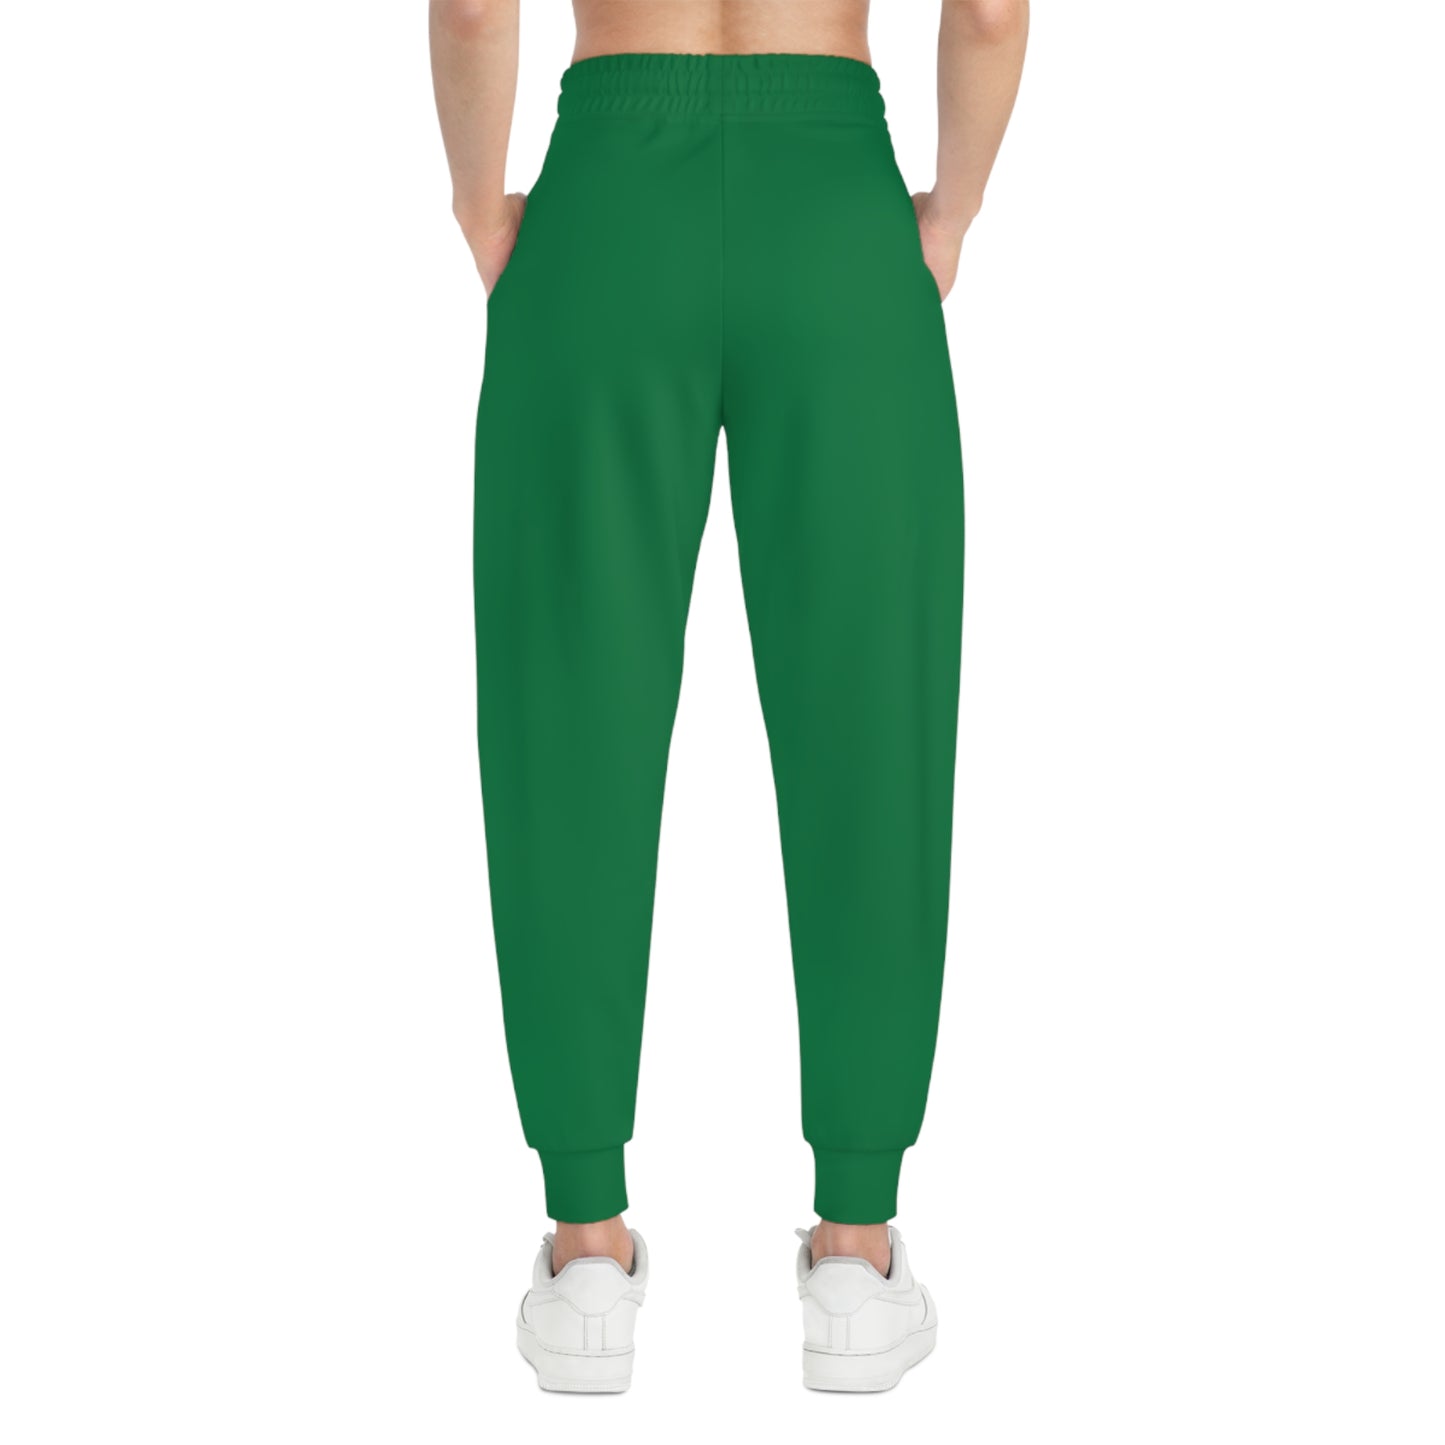 FOFMI WORLD CONVENTION 2023 Women's Athletic Joggers (Green)